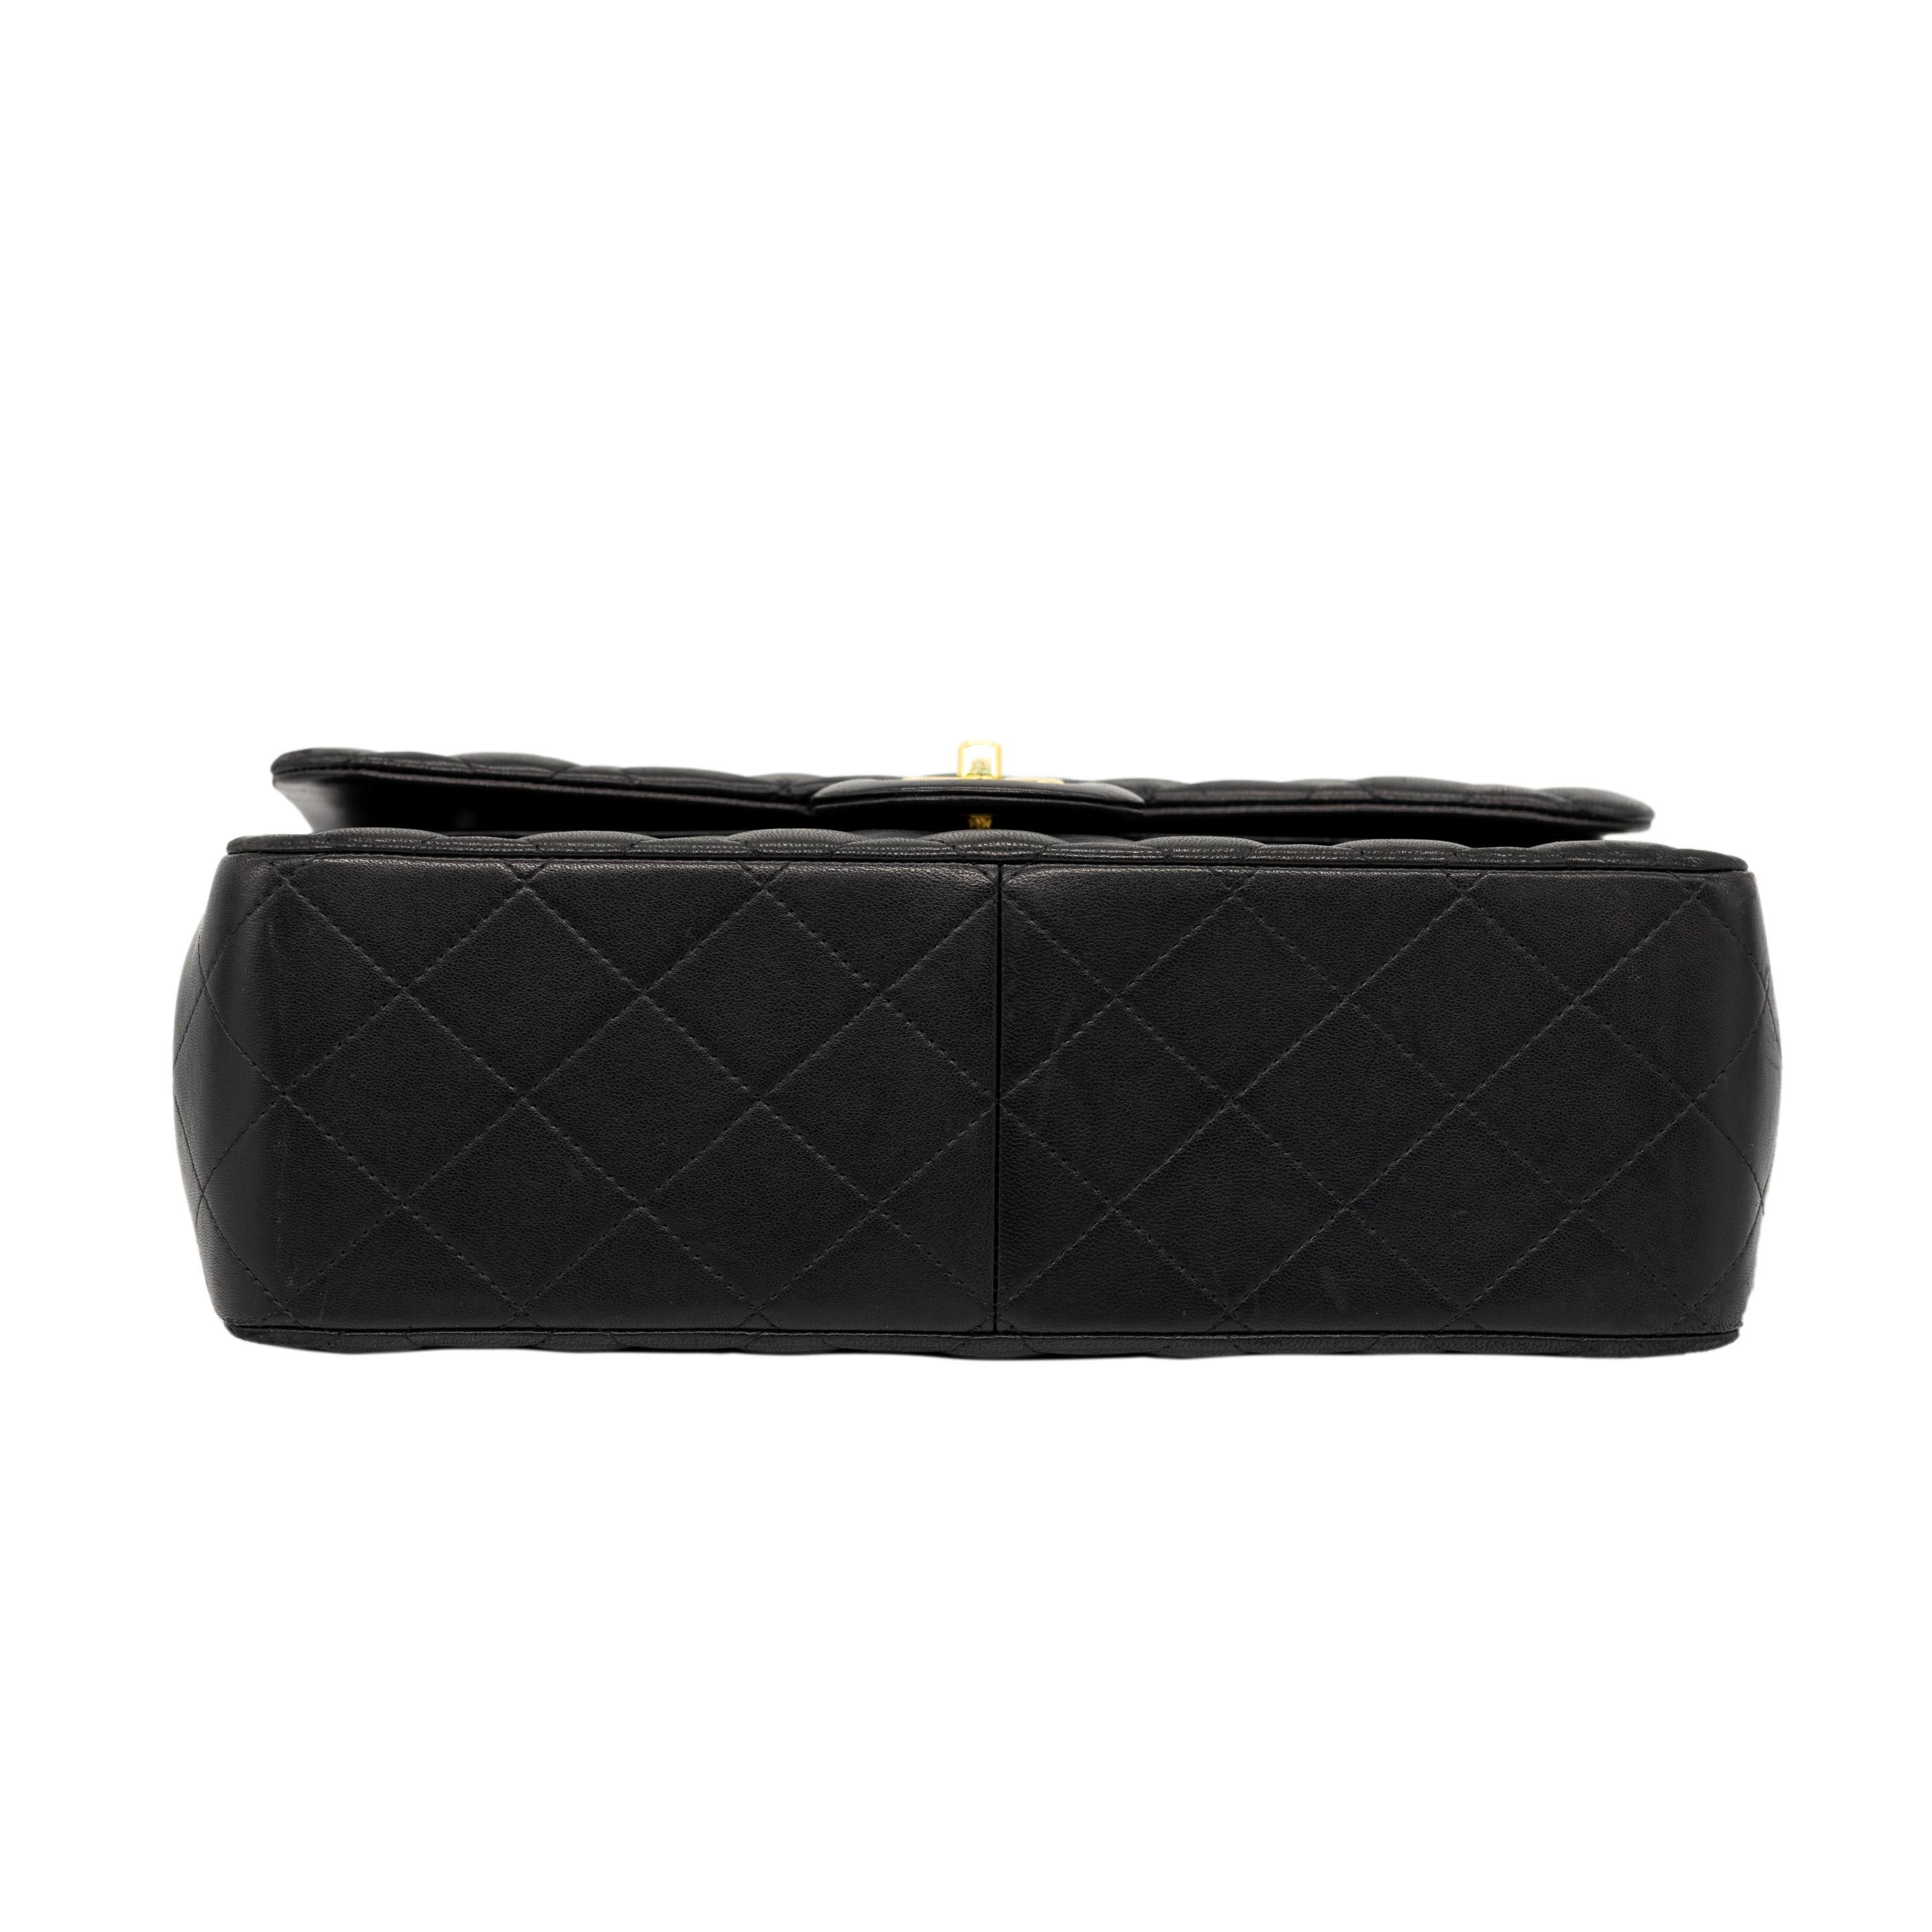 Chanel Timeless Black Jumbo Double Flap Quilted Lambskin Shoulder Bag, 2014. 2